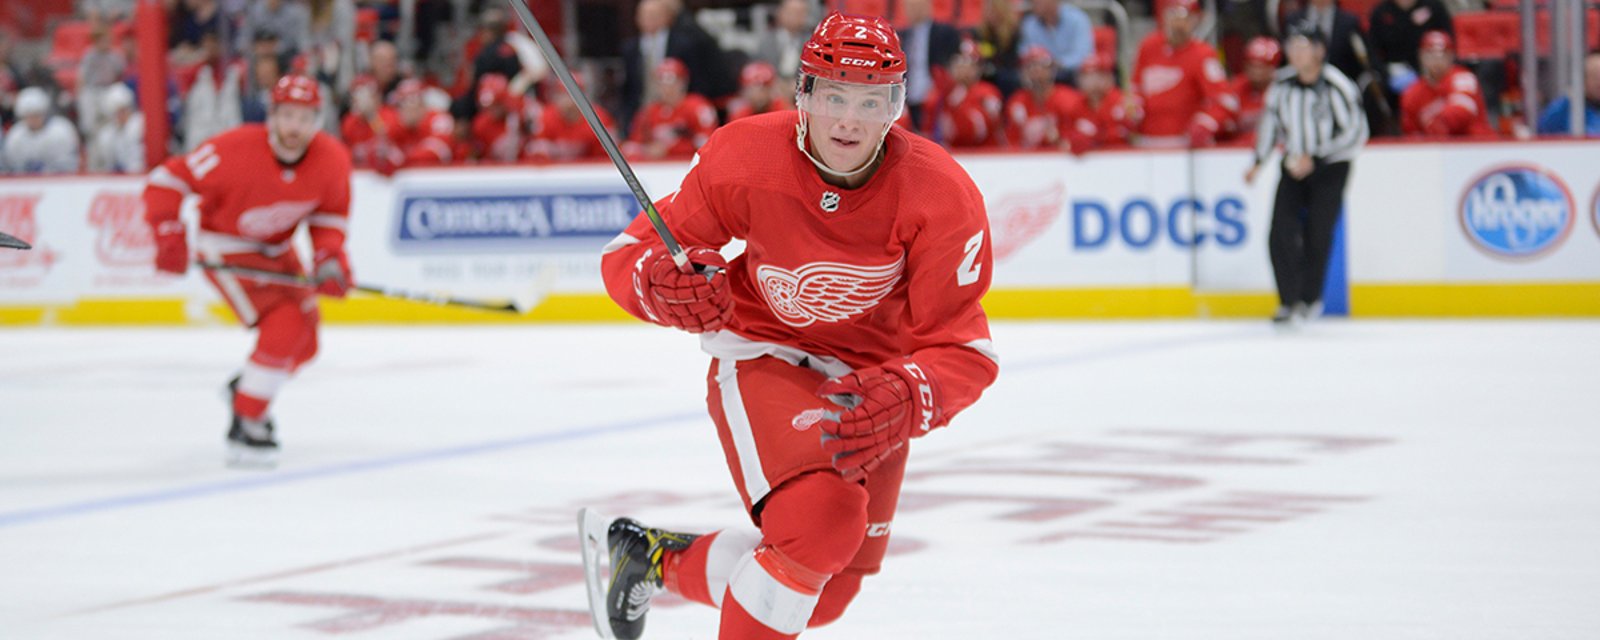 Red Wings rookie Hicketts spins off Wilson, sends him flying into end boards